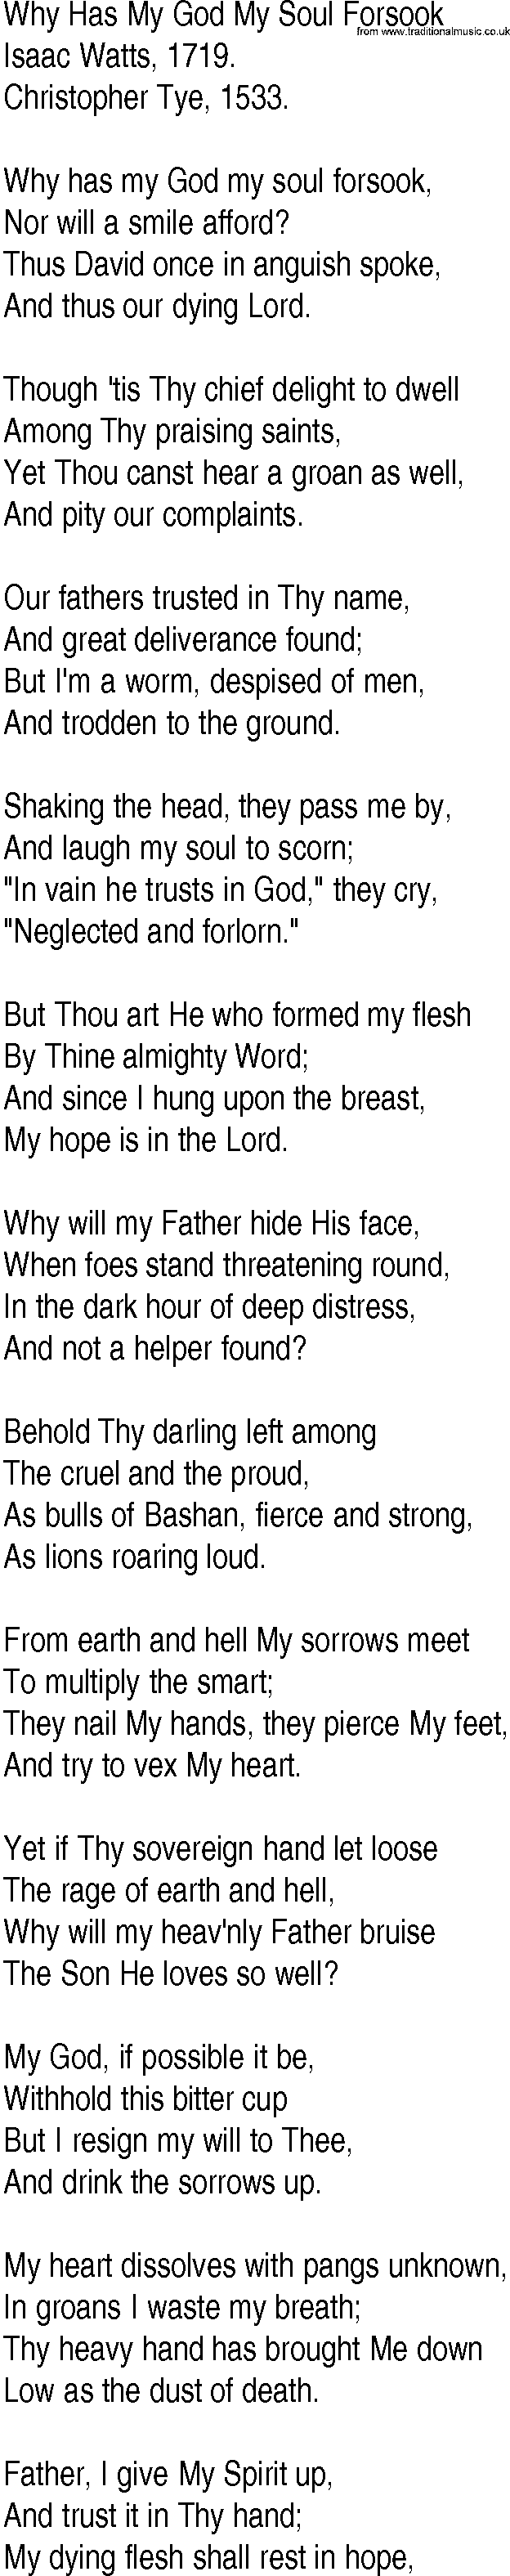 Hymn and Gospel Song: Why Has My God My Soul Forsook by Isaac Watts lyrics